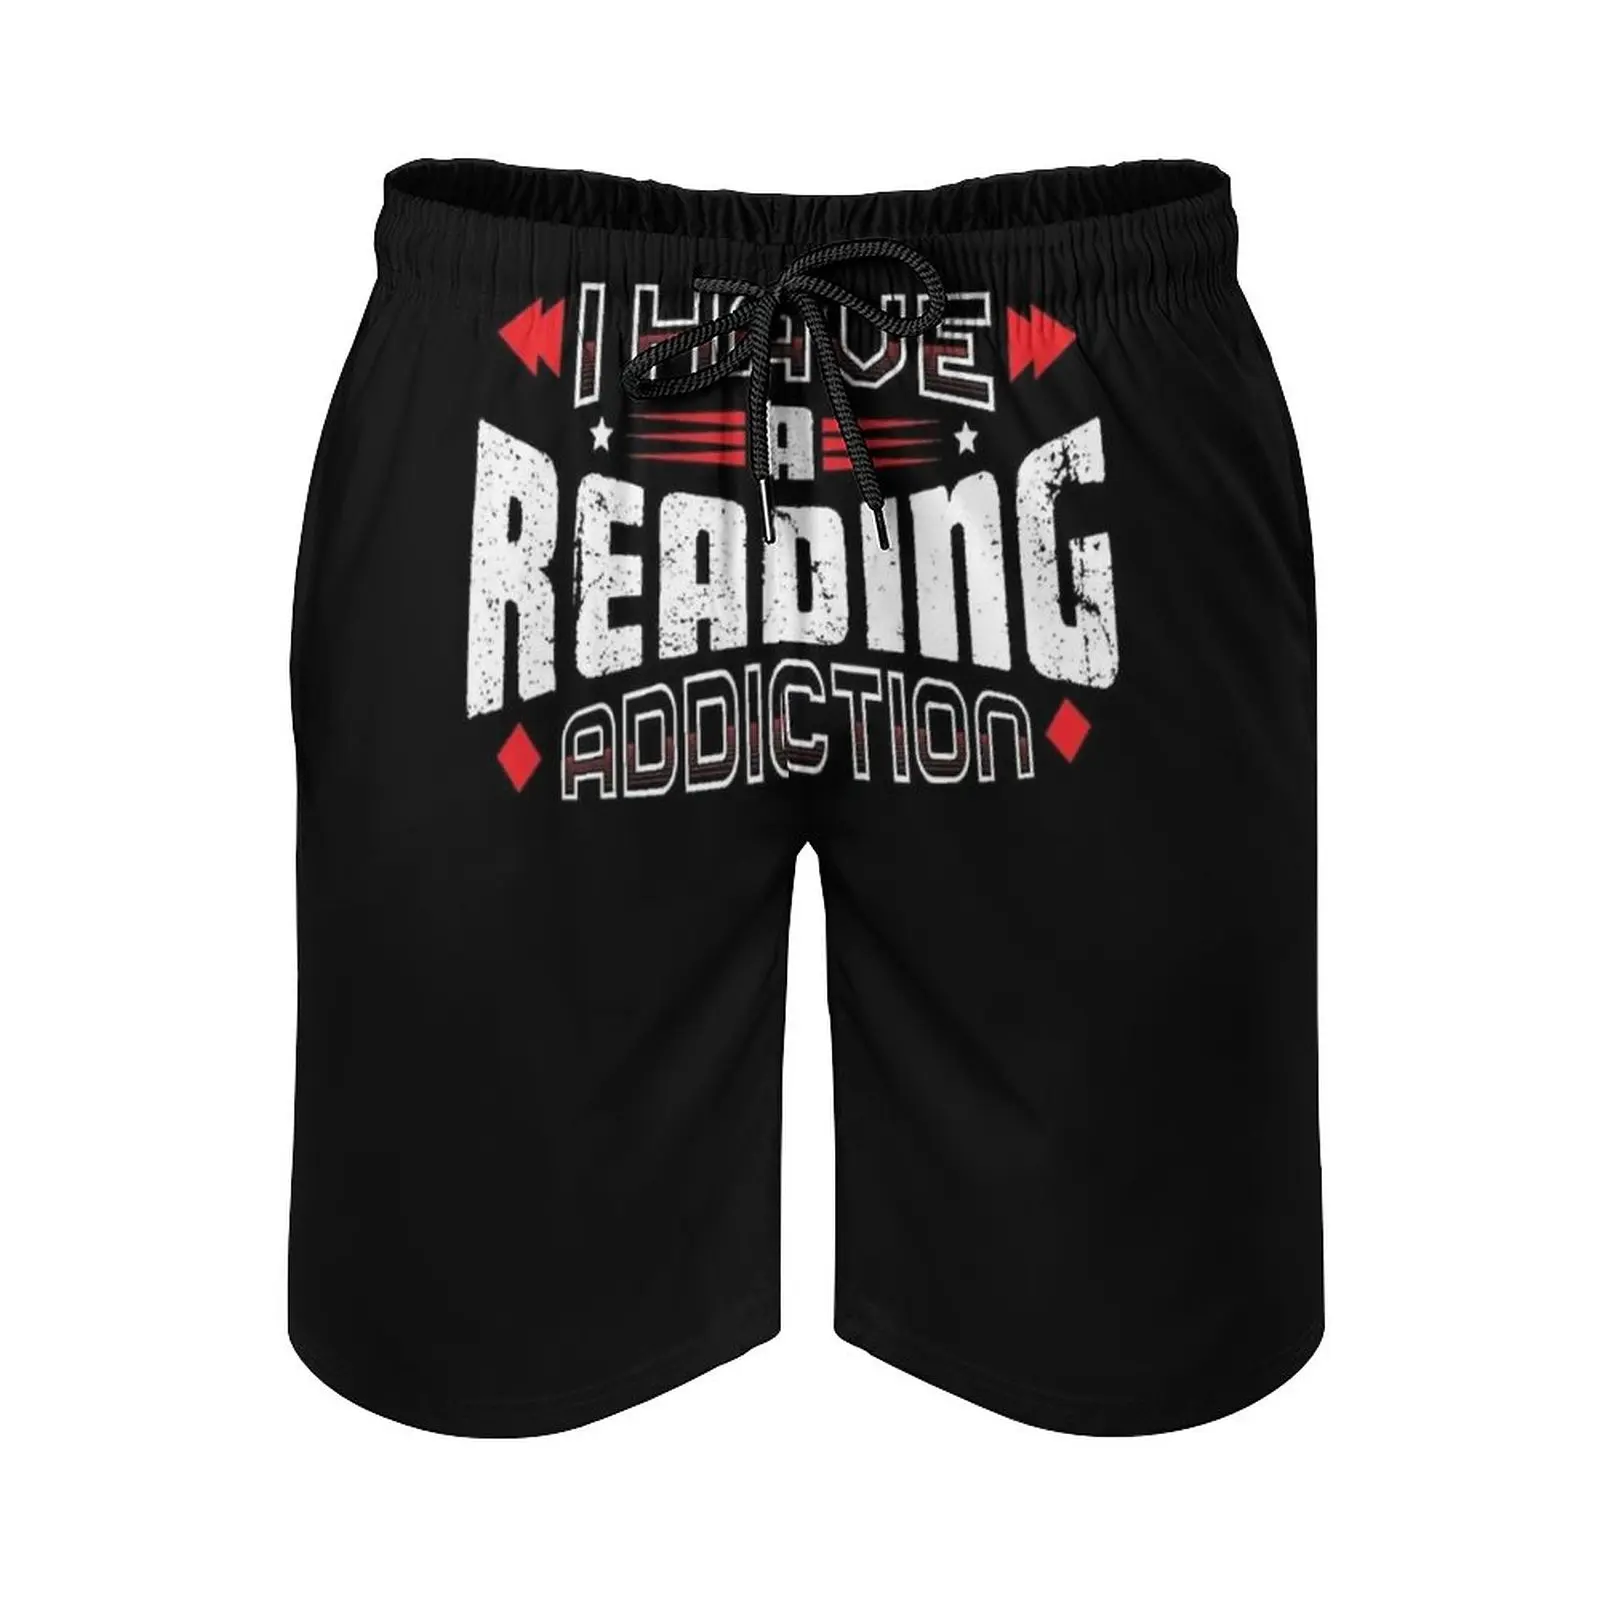 

I Have A Reading Addiction Vintage Distressed Quick Dry Summer Mens Beach Board Shorts Briefs For Man Gym Pants Shorts